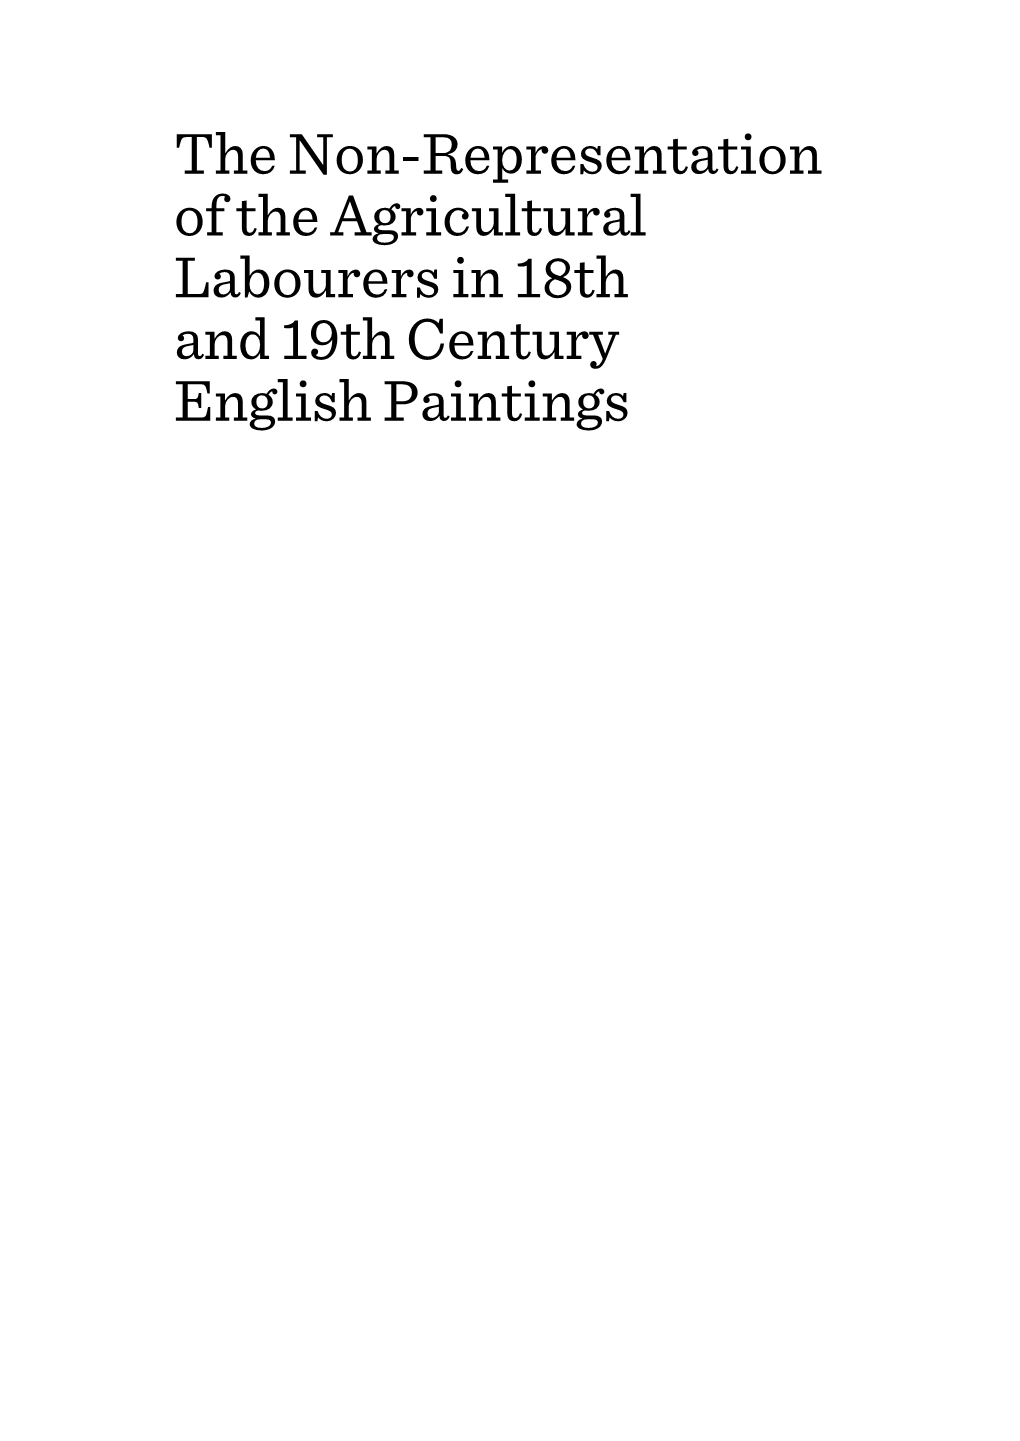 The Non-Representation of the Agricultural Labourers in 18Th and 19Th Century English Paintings